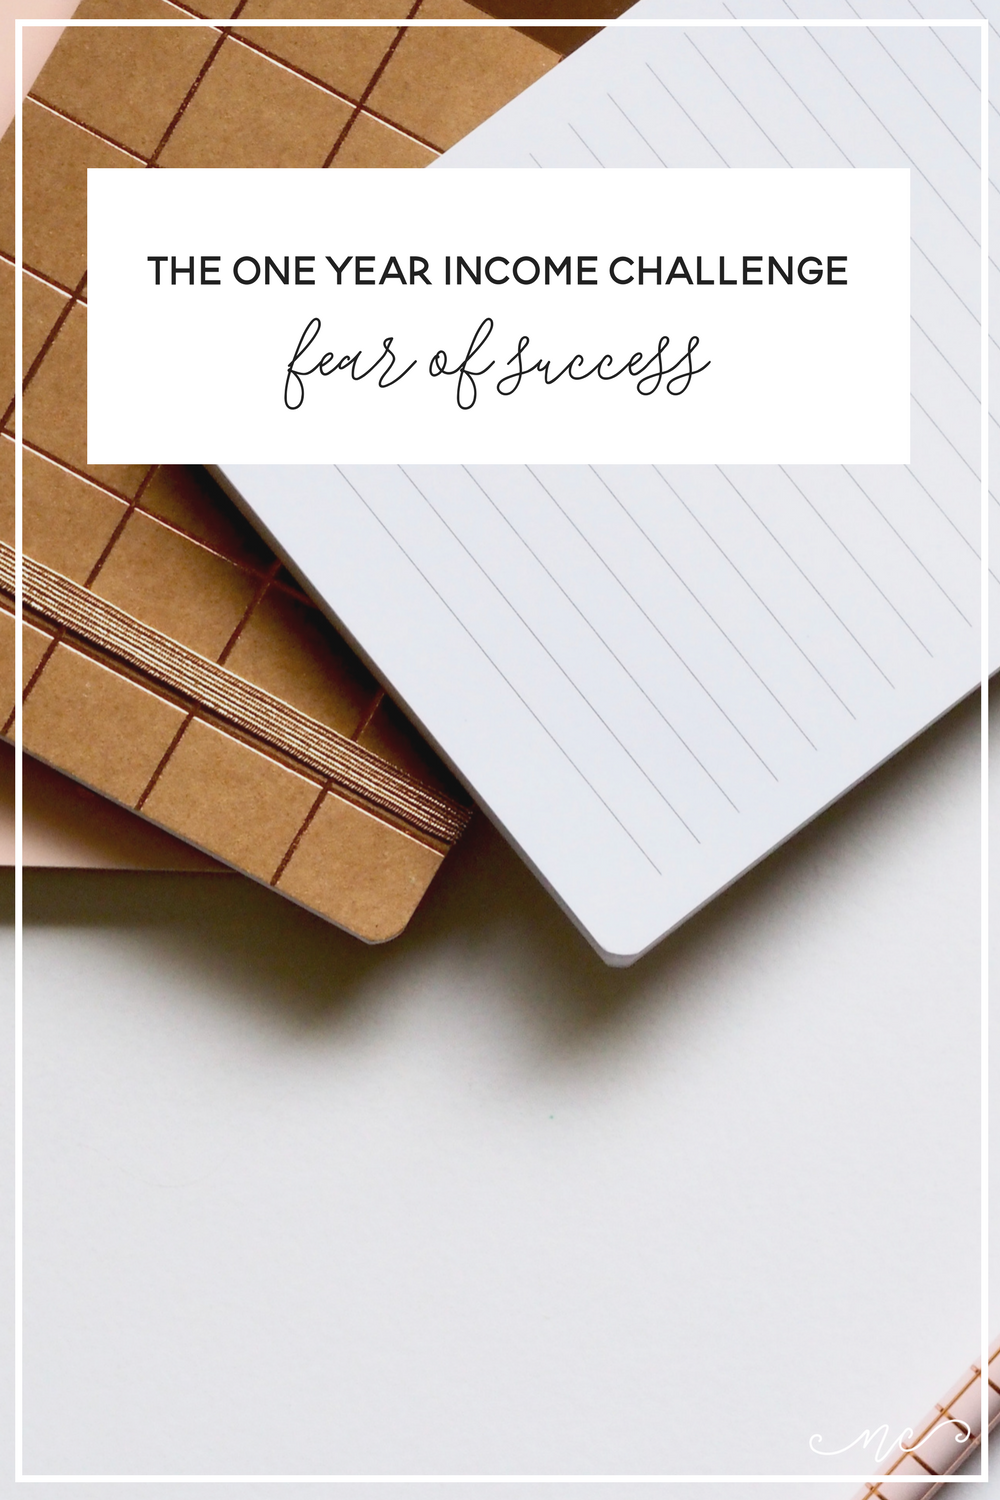 The One Year Income Challenge | Fear of Success